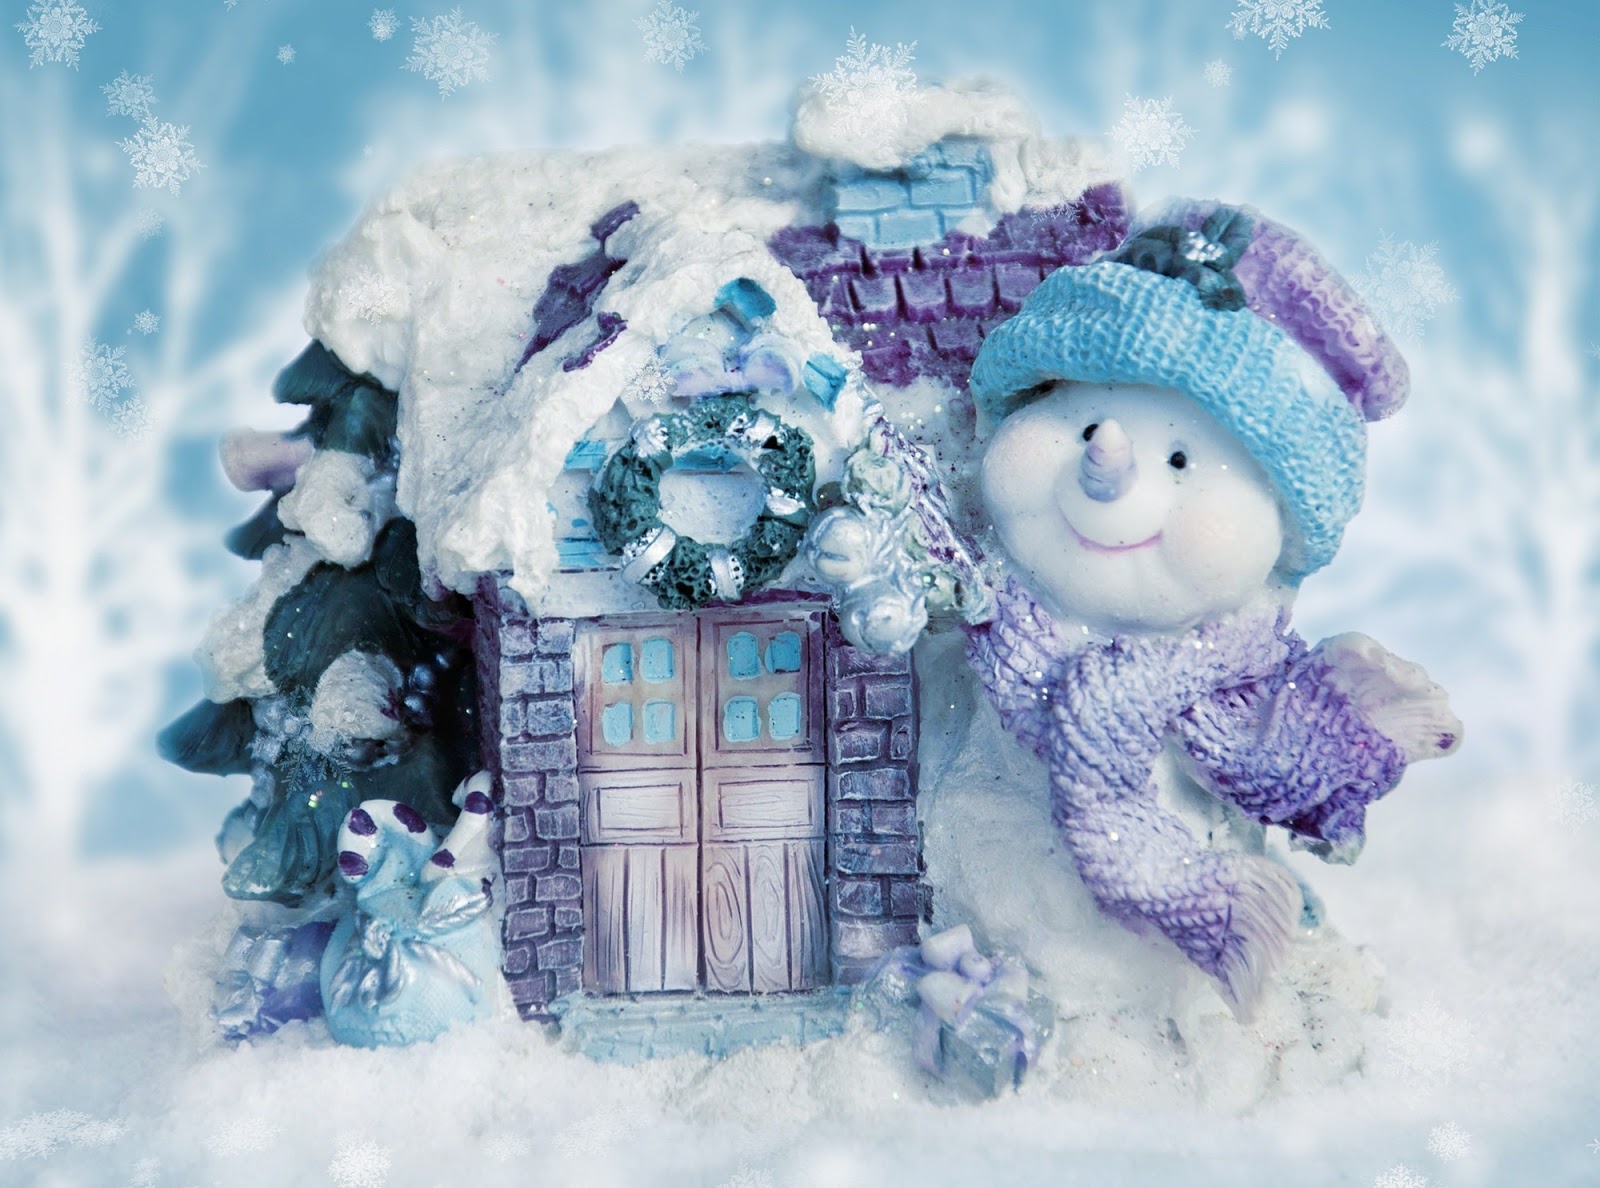 Cute Christmas snowman pictures merry Xmas wallpapers